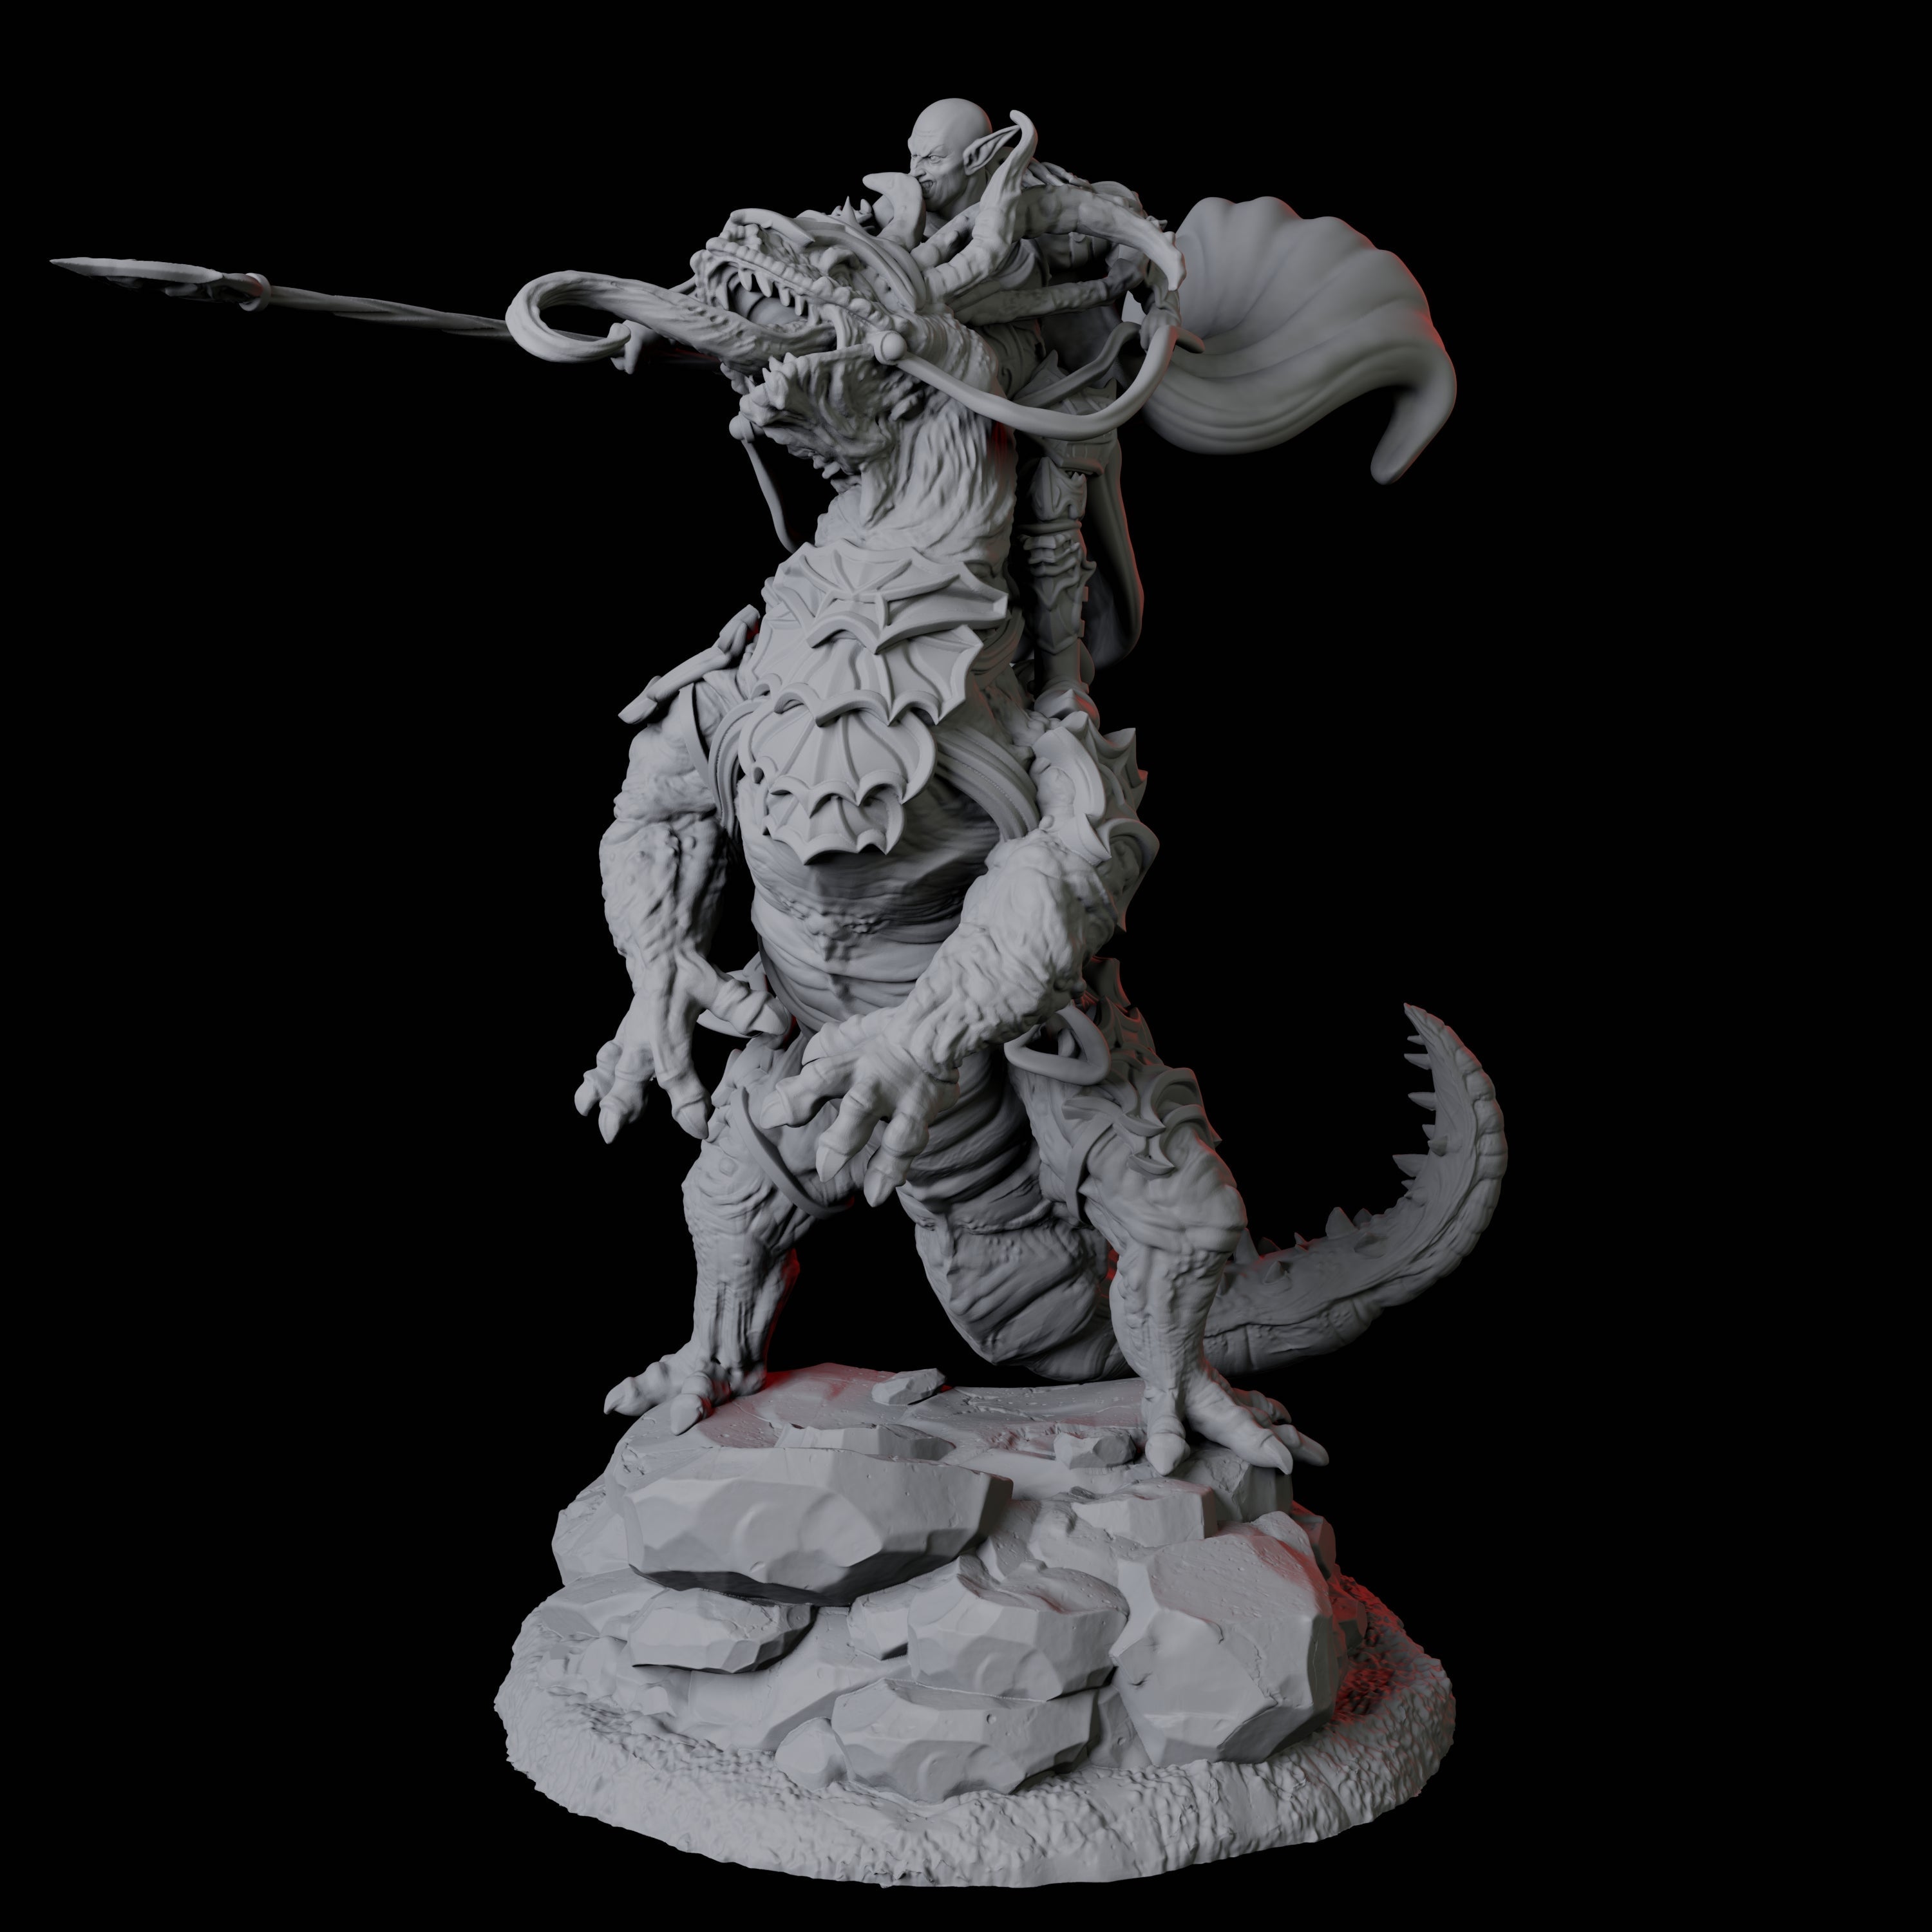 Fighter mounted on Giant Lizard D Miniature for Dungeons and Dragons, Pathfinder or other TTRPGs